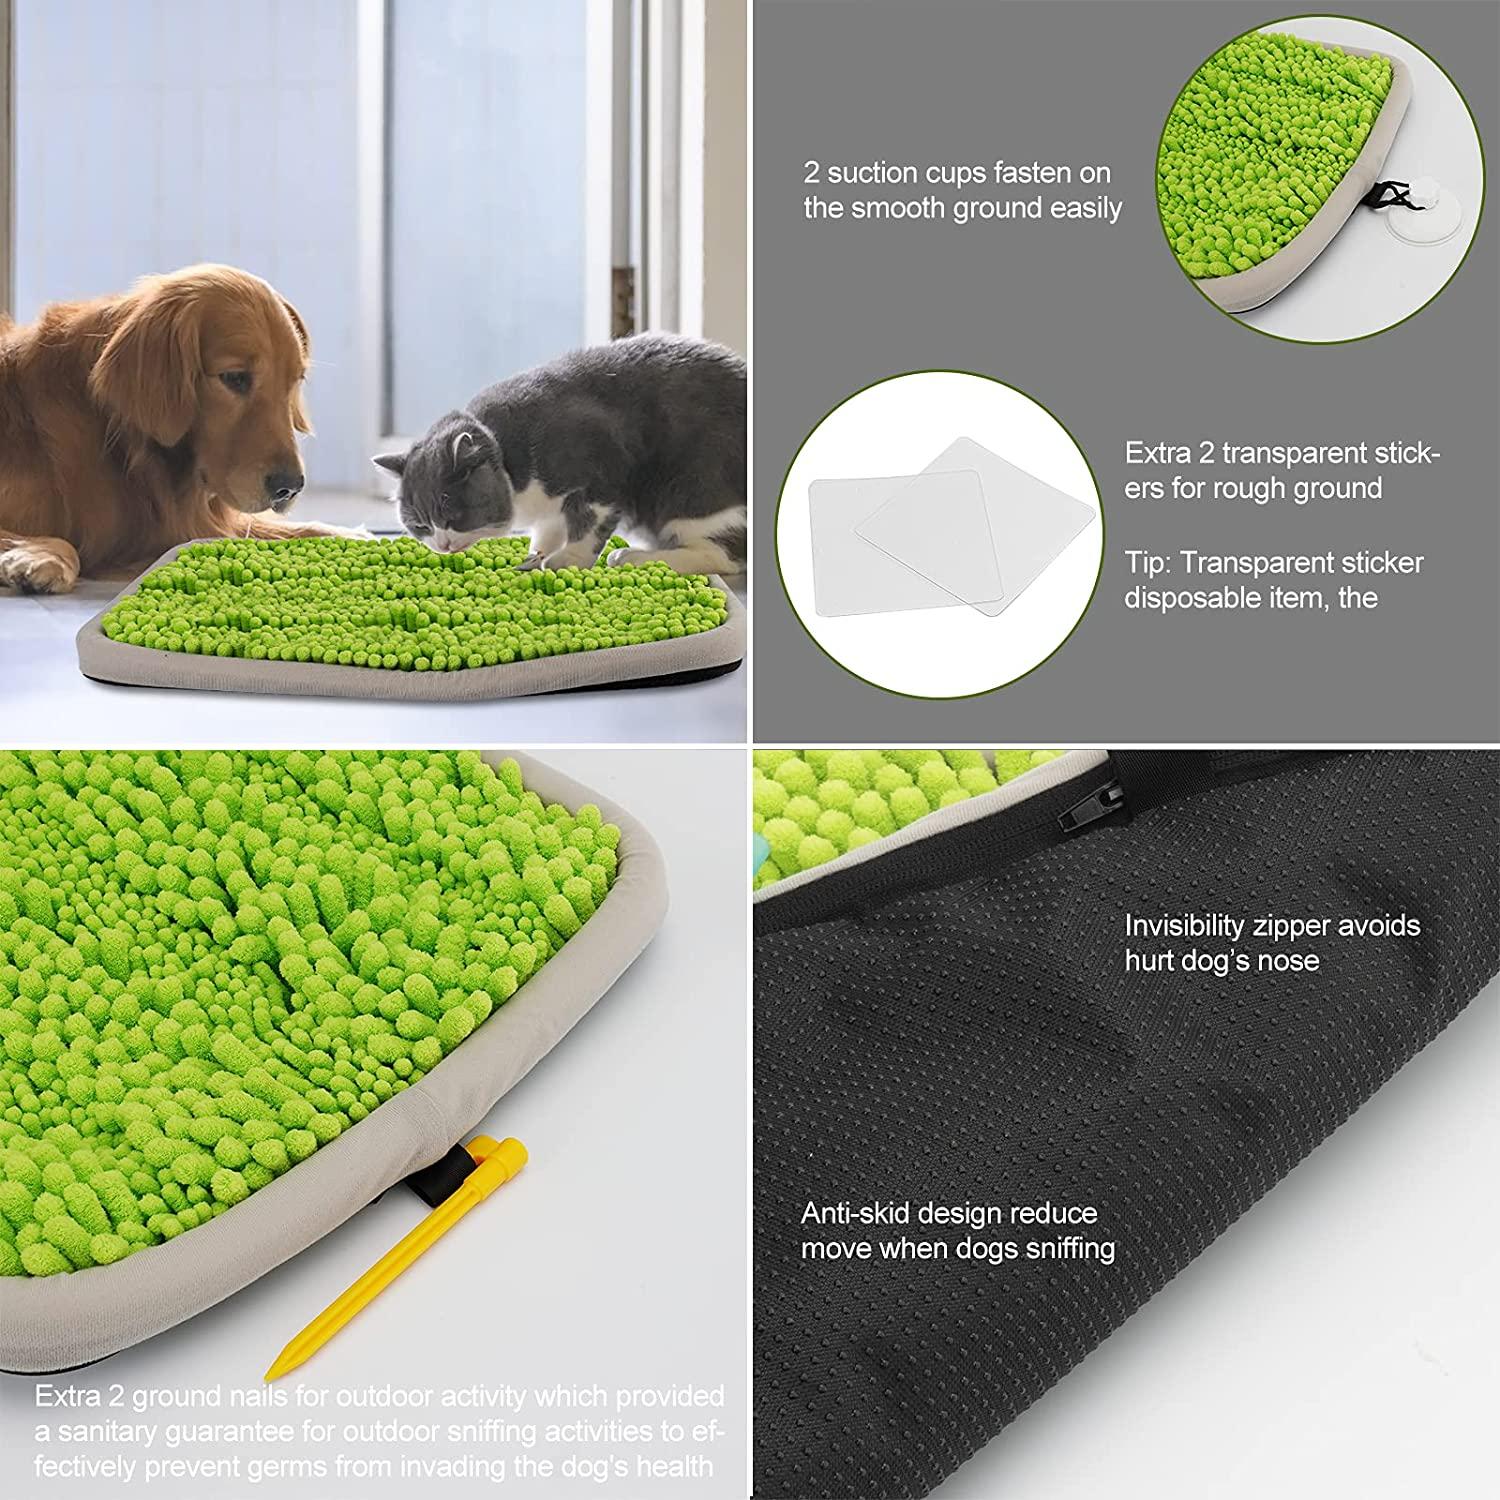 Dog Snuffle Mat Interactive Toy Pet Sniffing Feeding Smell Training Feeding  Pad